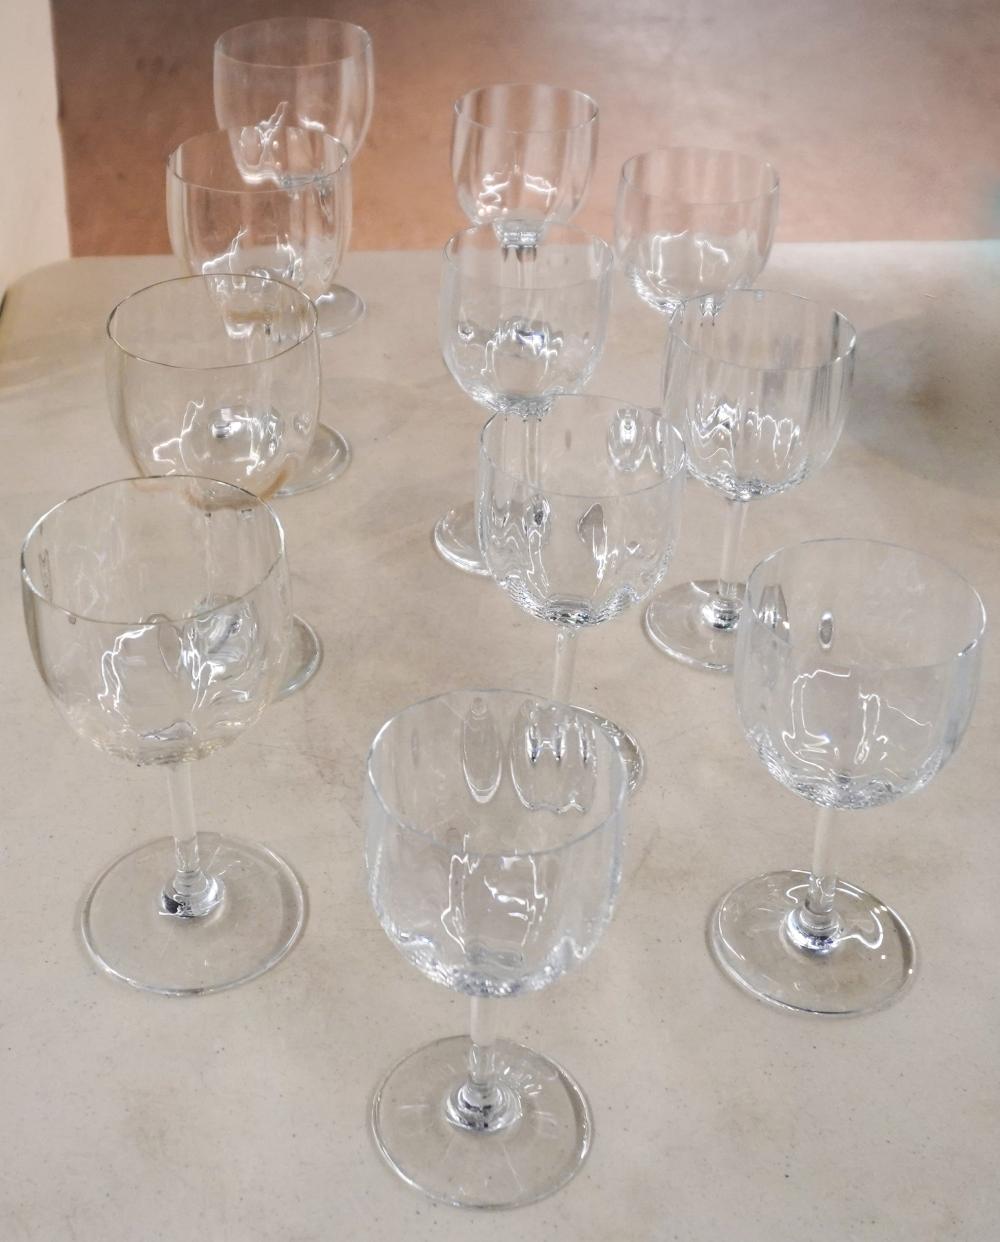 GROUP OF 11 BACCARAT CRYSTAL STEMS